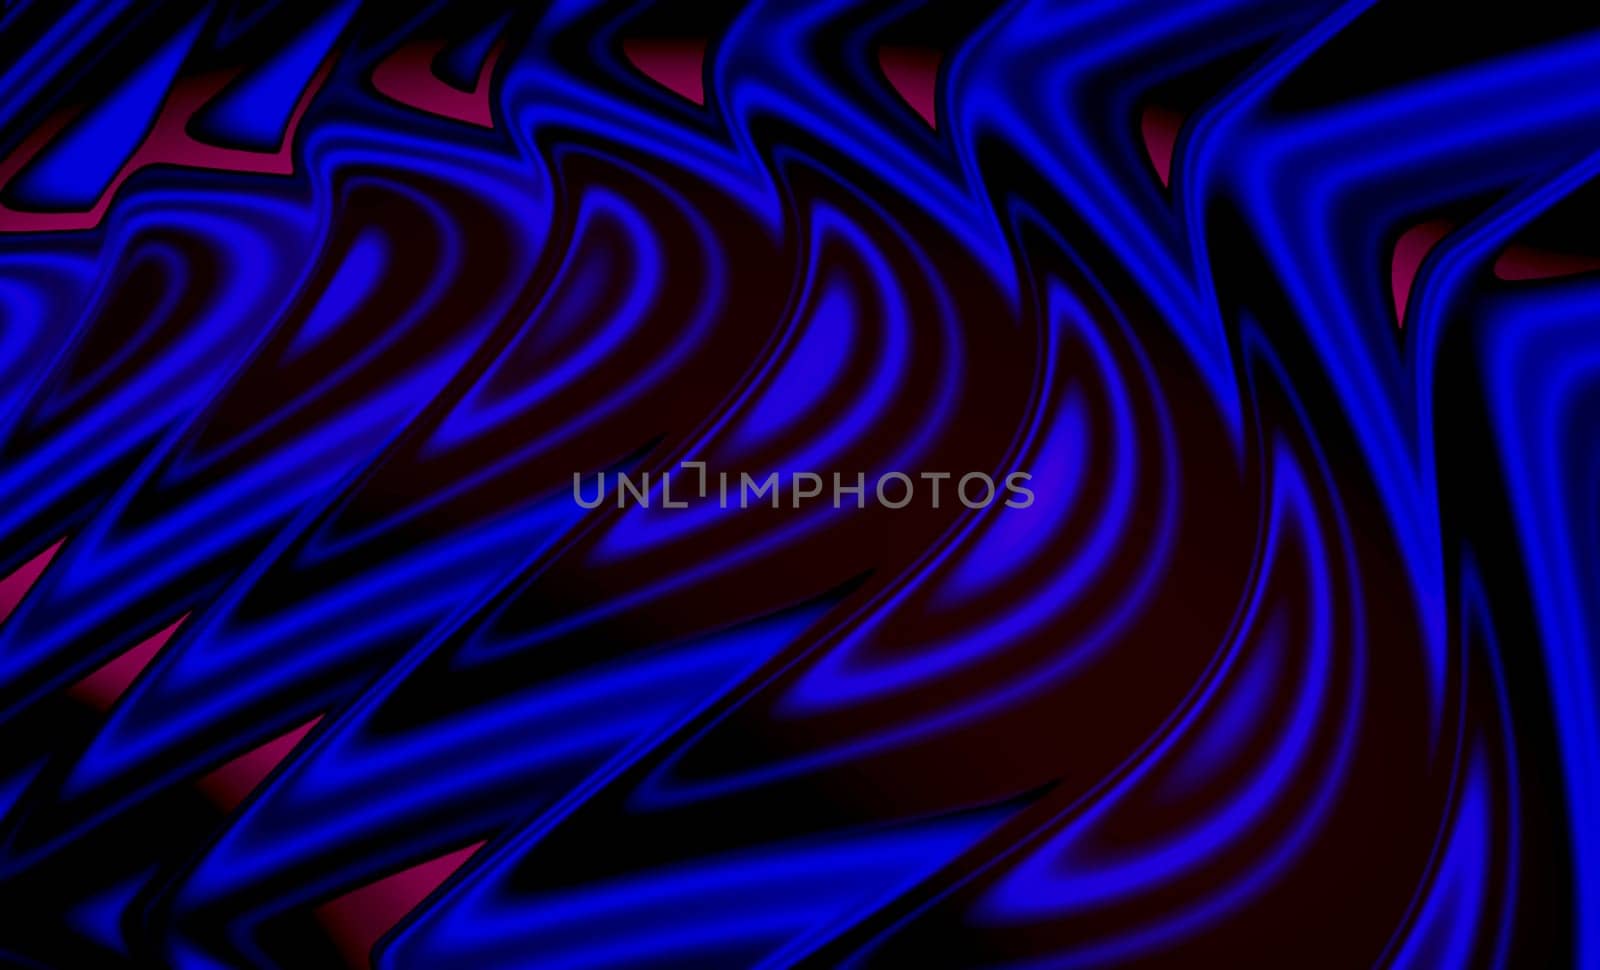 Multi-row wavy pattern in blue with pink back lighting.